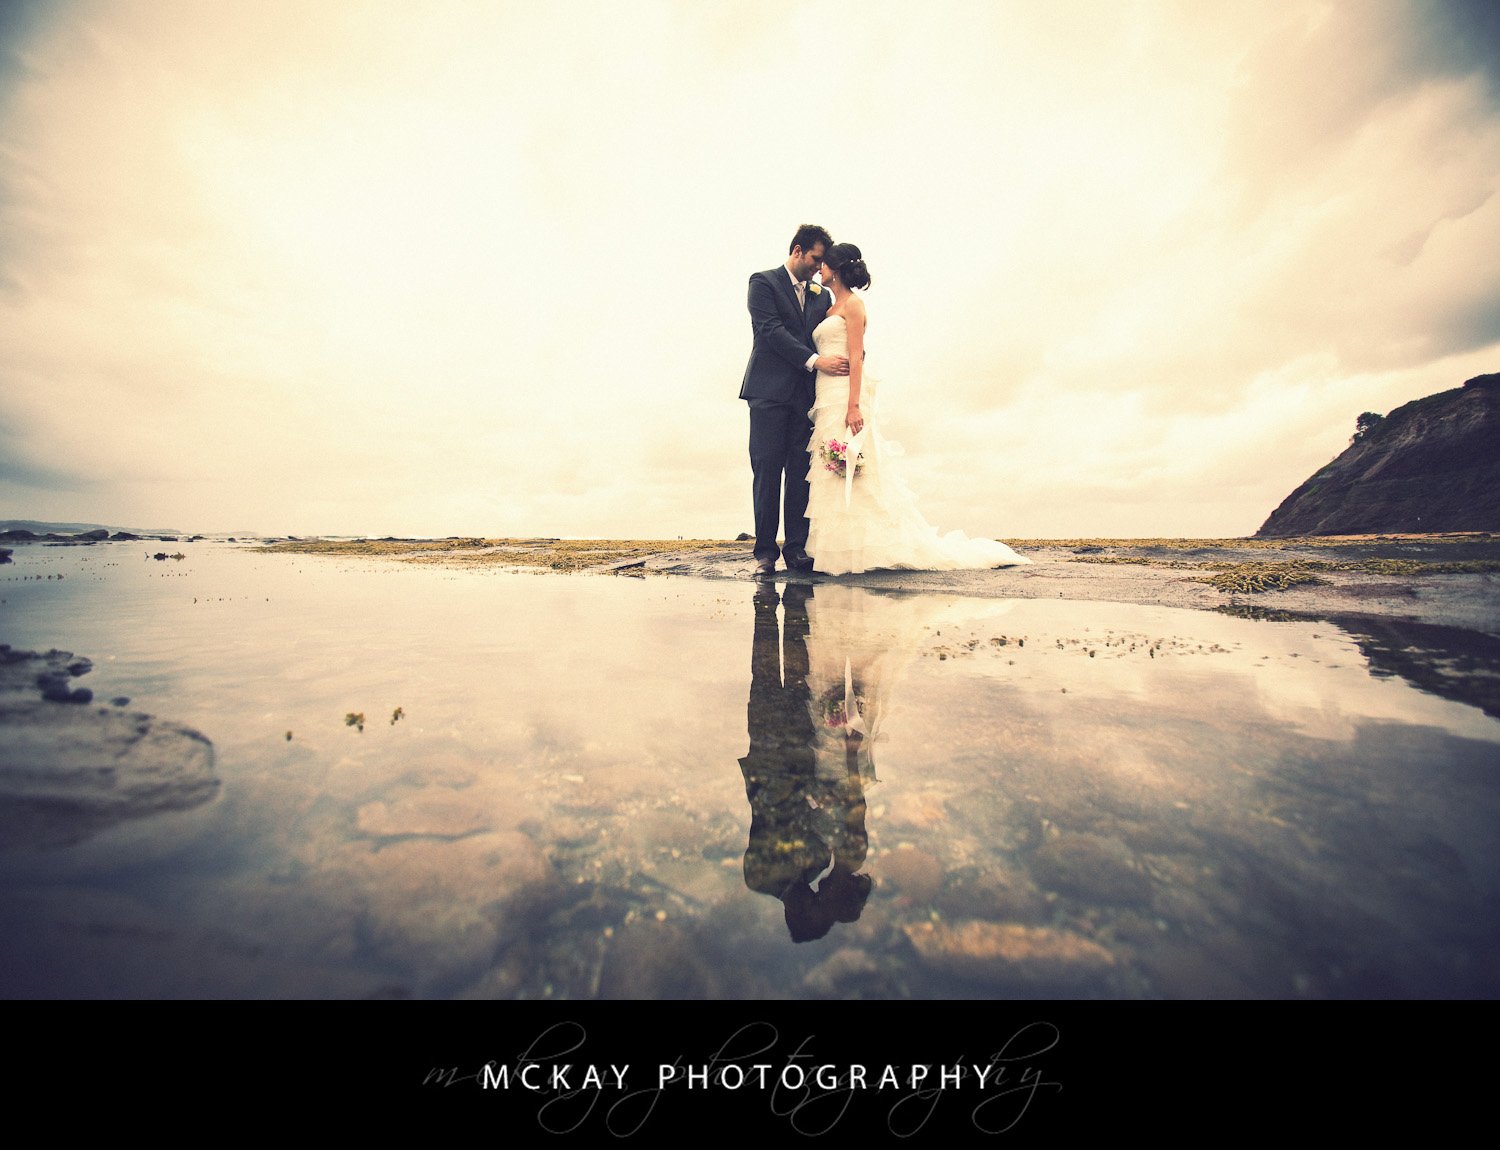 Awesome reflections at Long Reef Sam Thibault Wedding 